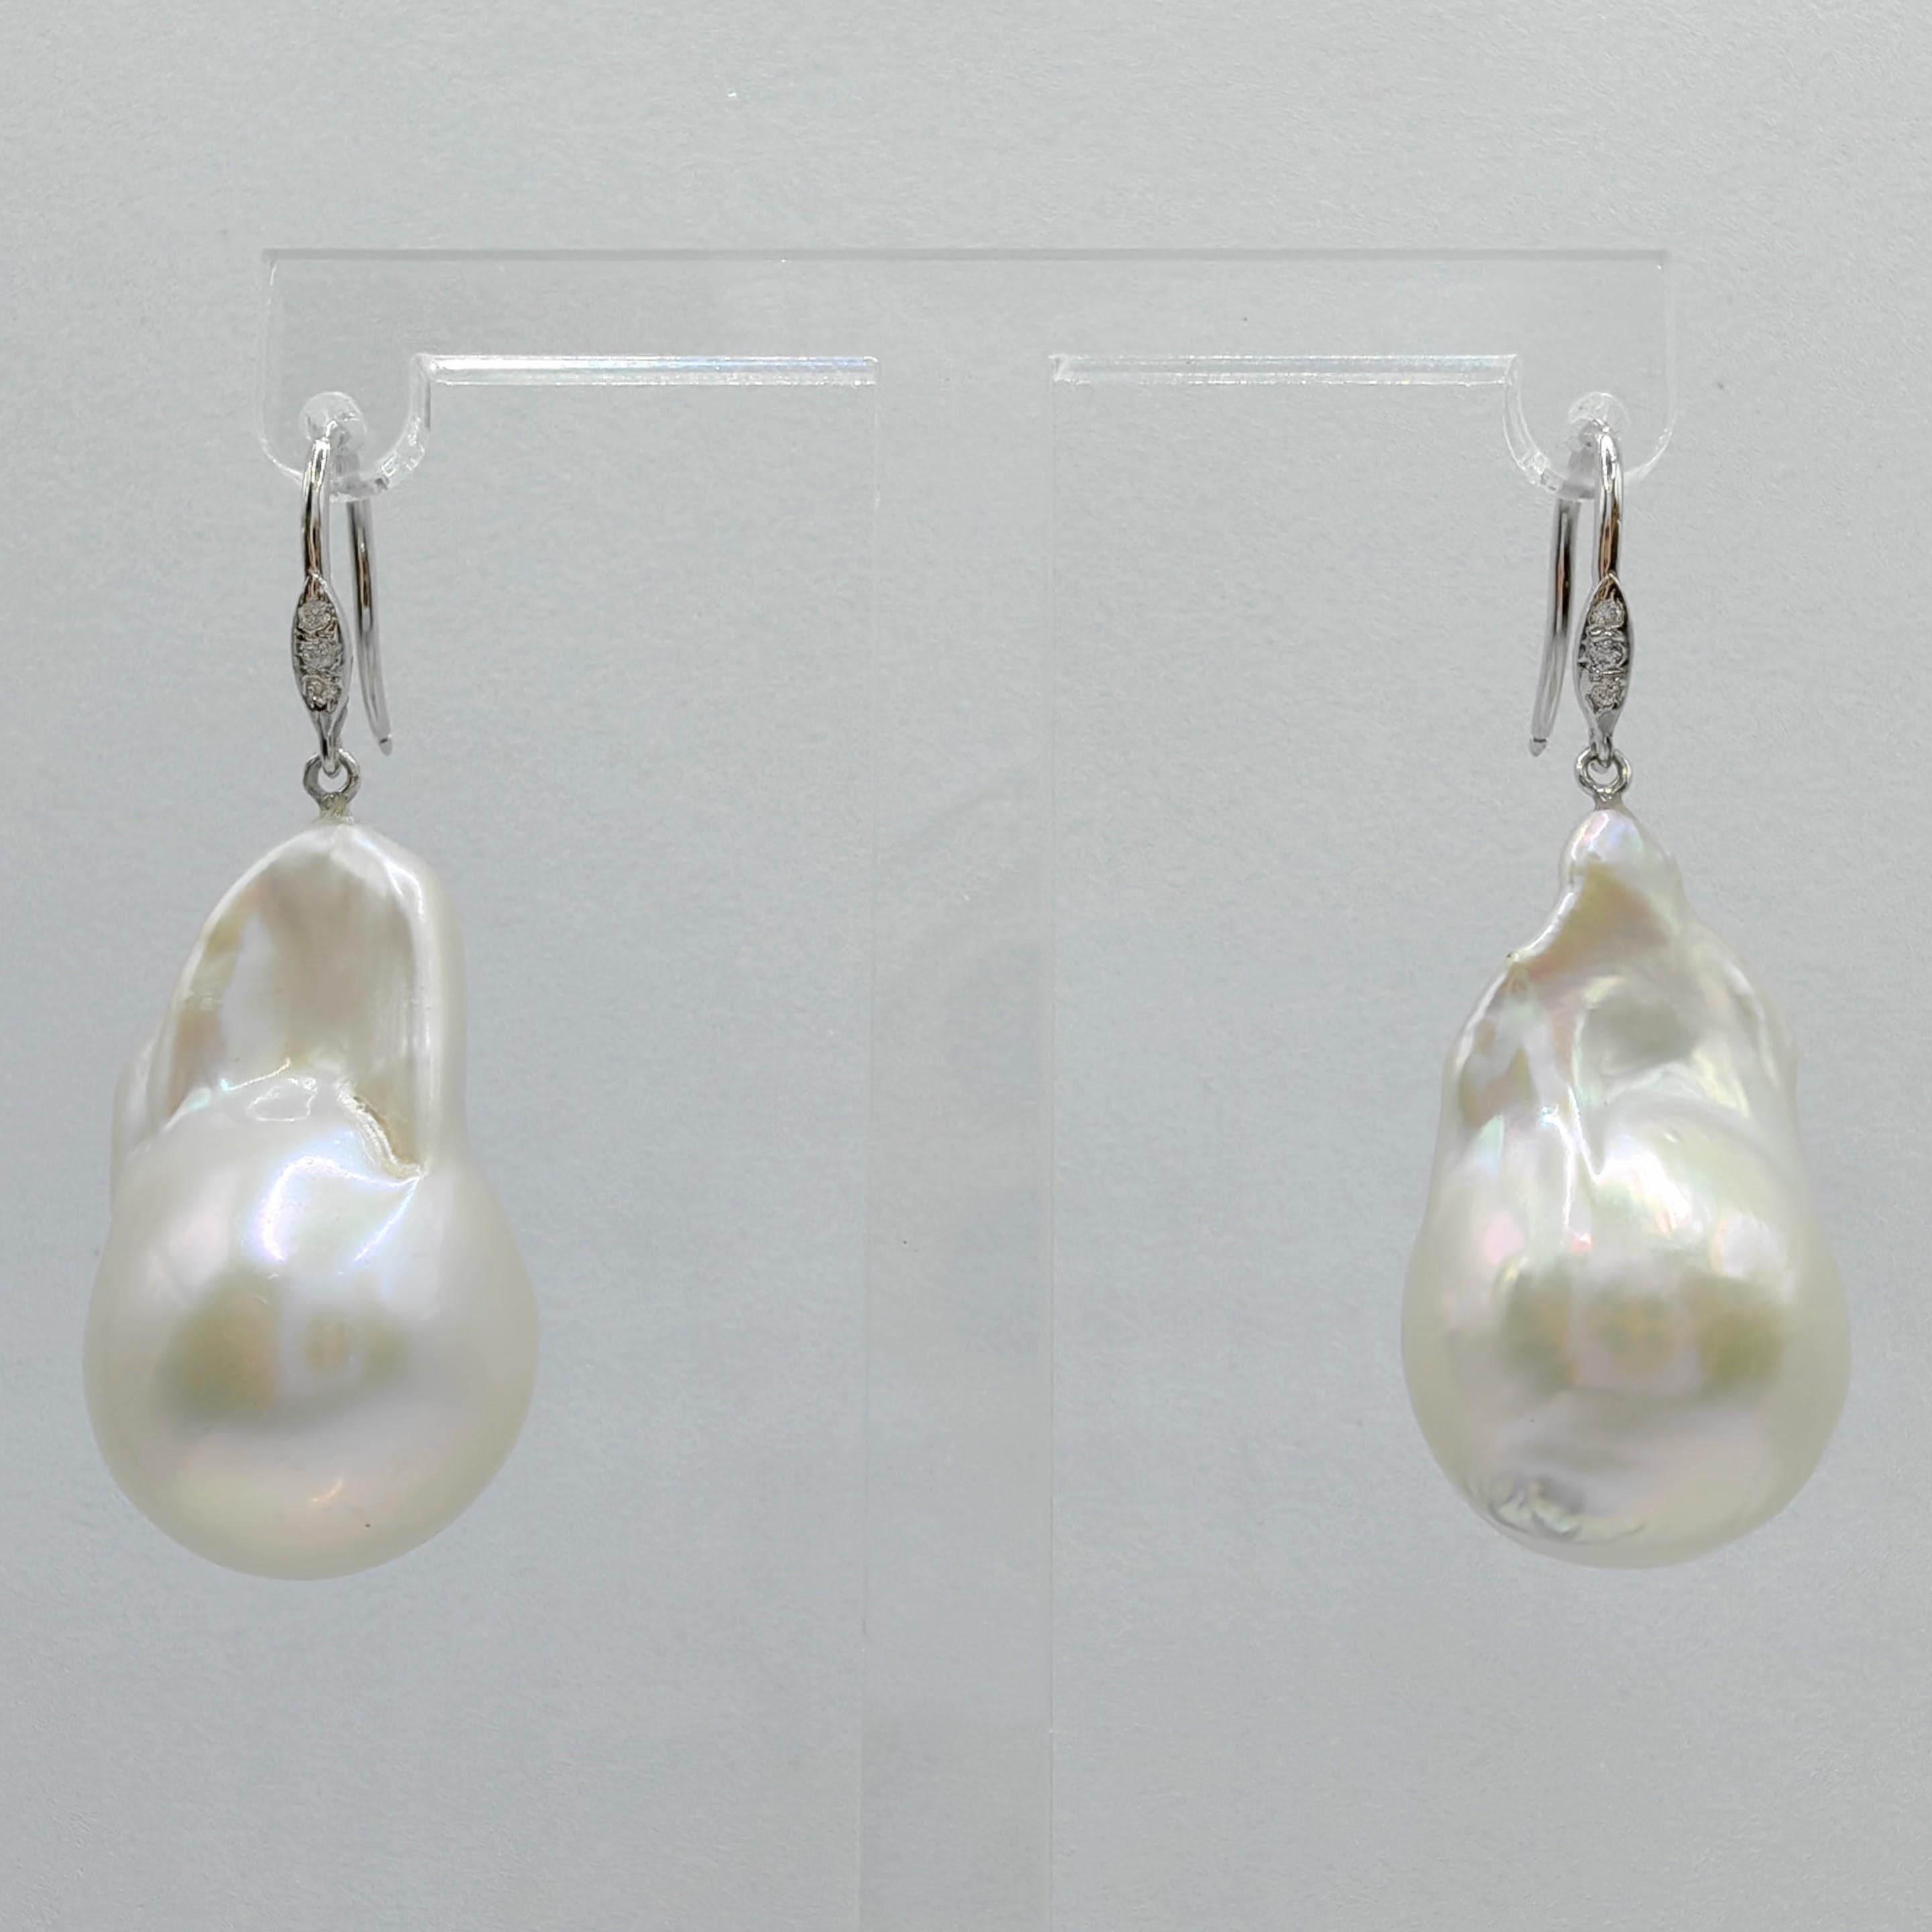 Indulge in the enchanting elegance of our Baroque Pearl Diamond Dangling Drop Earrings with 18K White Gold French Hooks. Featuring two captivating Freshwater Cultured Baroque Pearls, weighing 30.66 and 28.75 carats respectively, these earrings exude